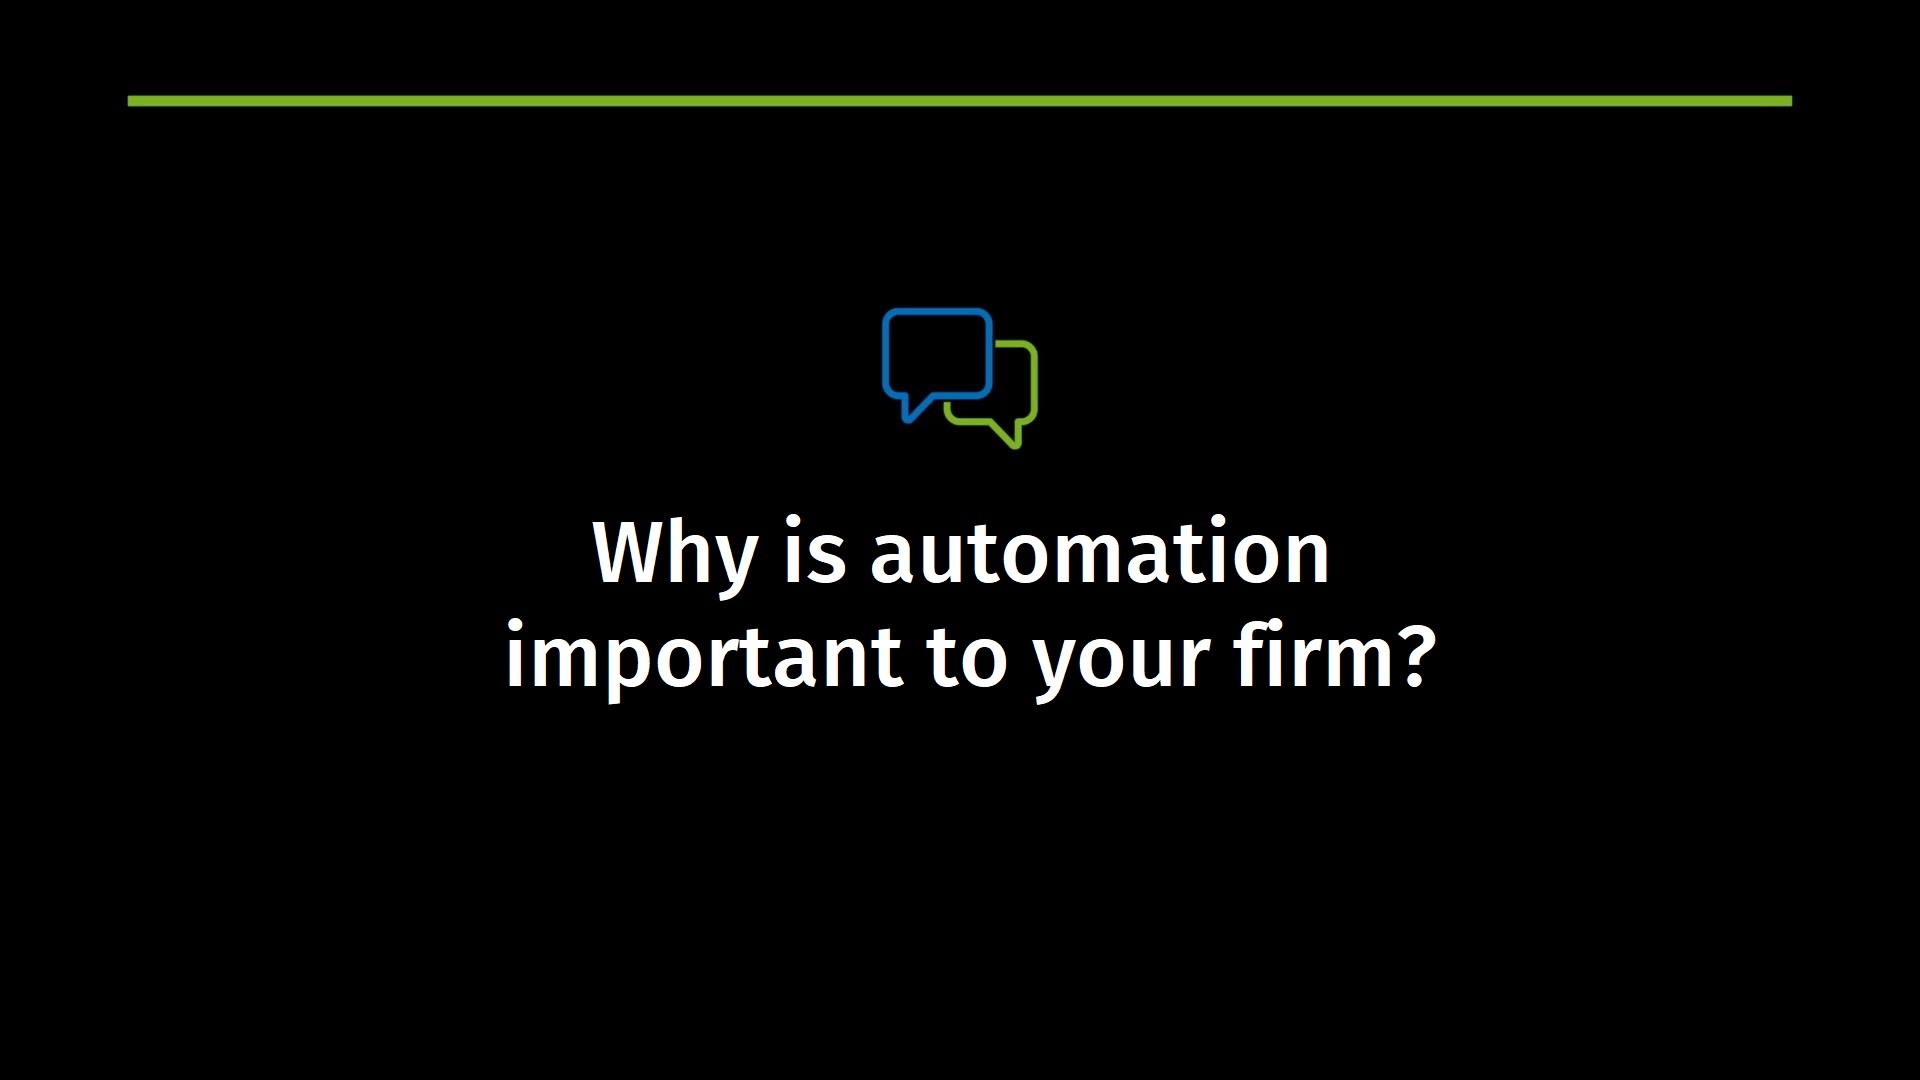 Why is automation important to your firm?